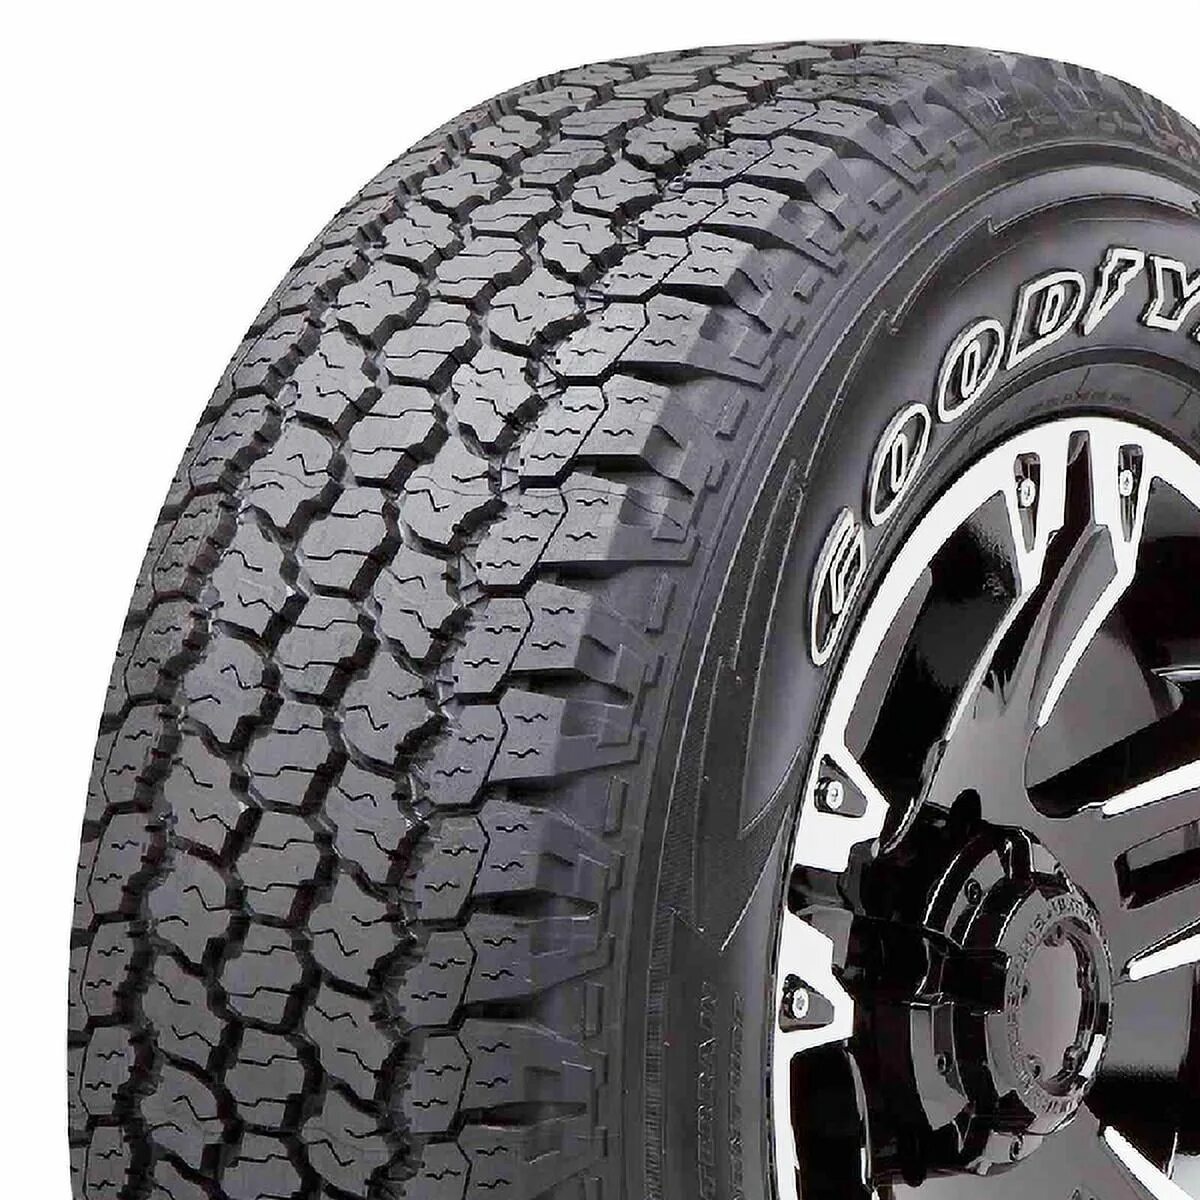 Goodyear Wrangler at Adventure. Goodyear Wrangler all Terrain Kevlar. Goodyear Wrangler all-Terrain Adventure. Goodyear Wrangler all-Terrain Adventure with Kevlar 235/75 r15 109t XL.